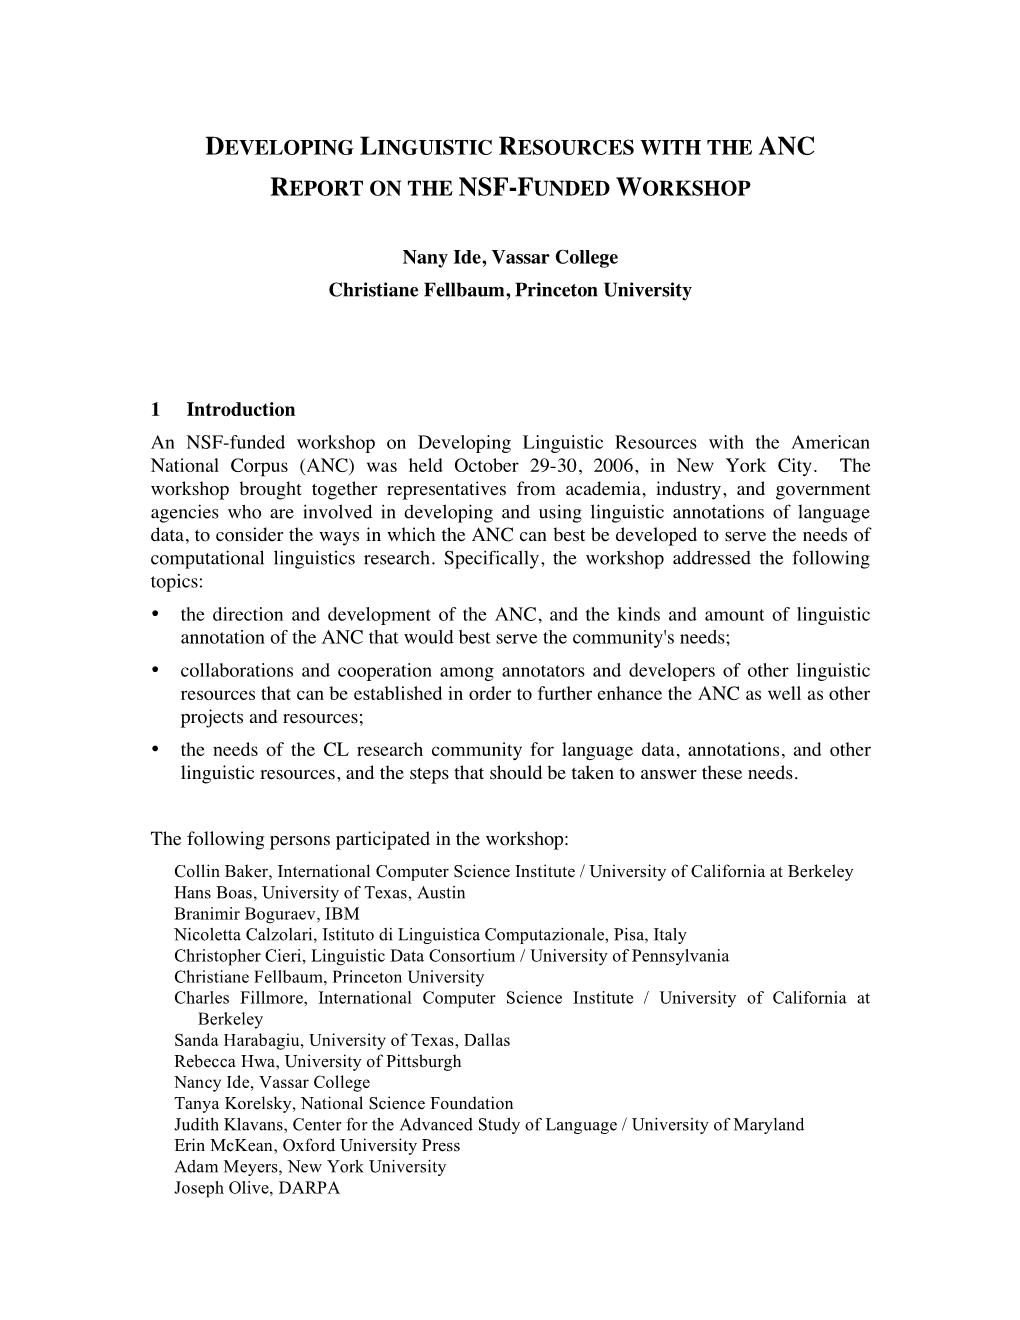 Developing Linguistic Resources with the Anc Report on the Nsf-Funded Workshop